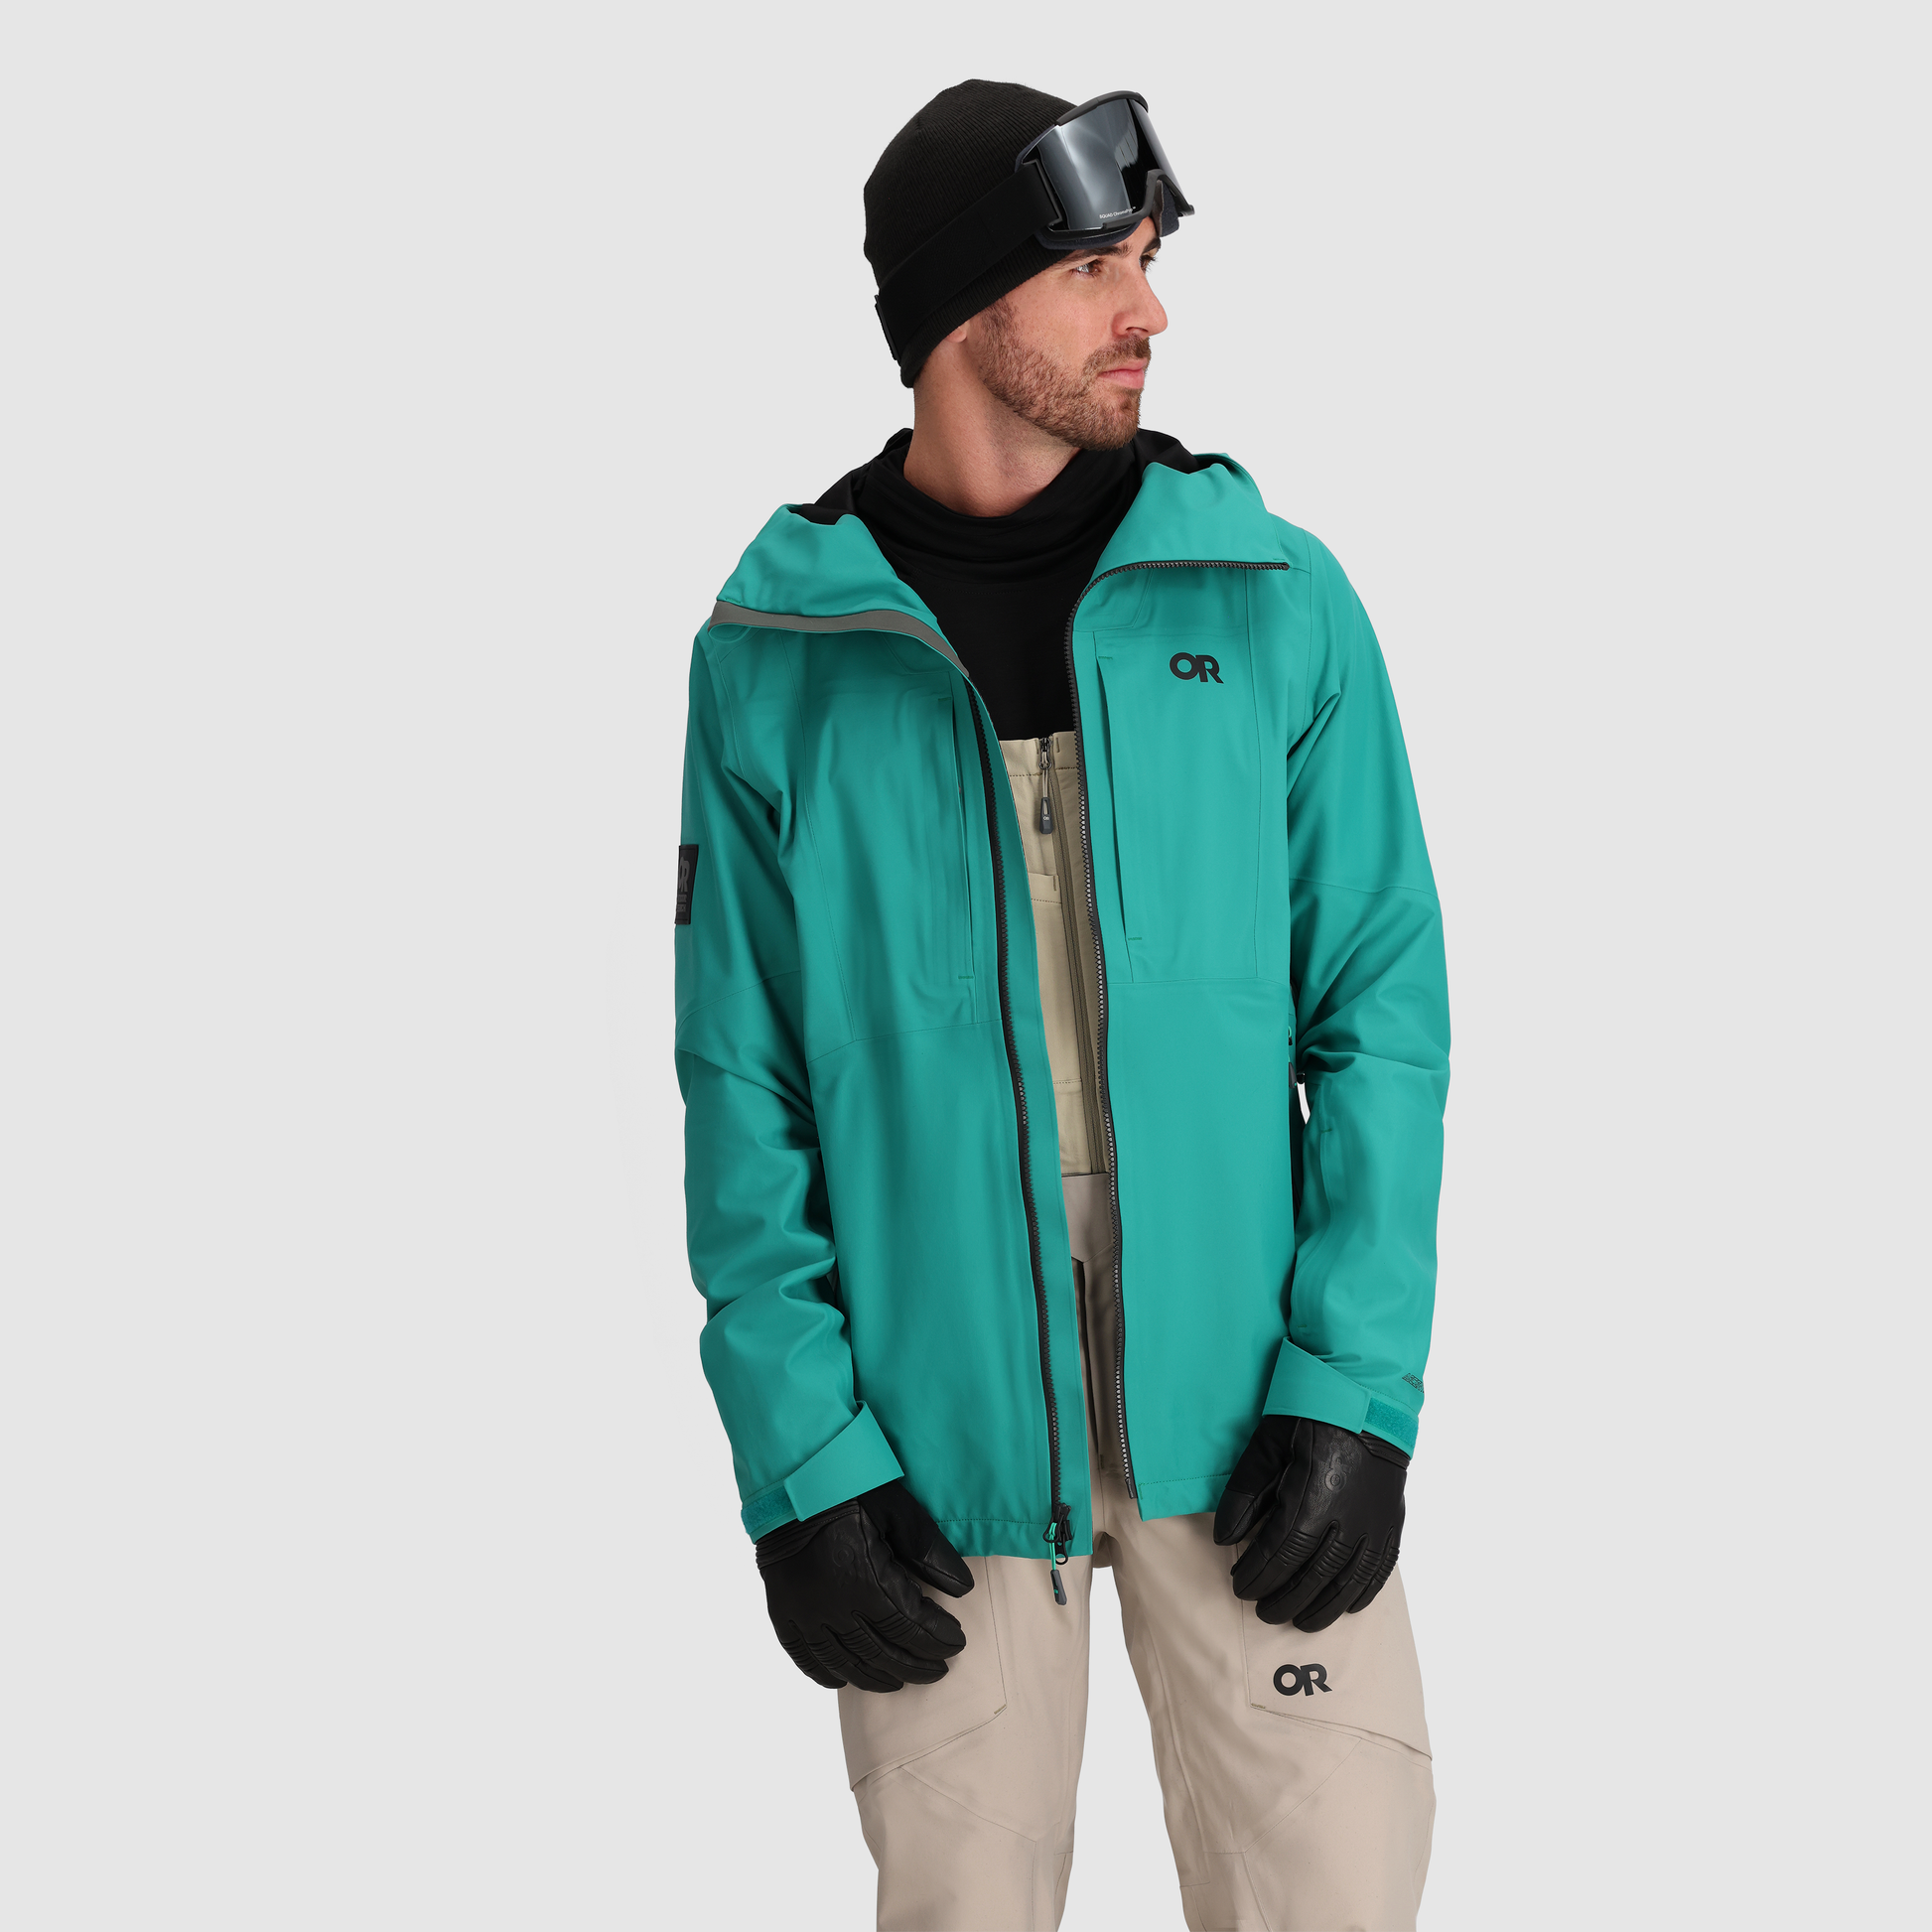 Review: Outdoor Research Skytour AscentShell Jacket and Bibs - The